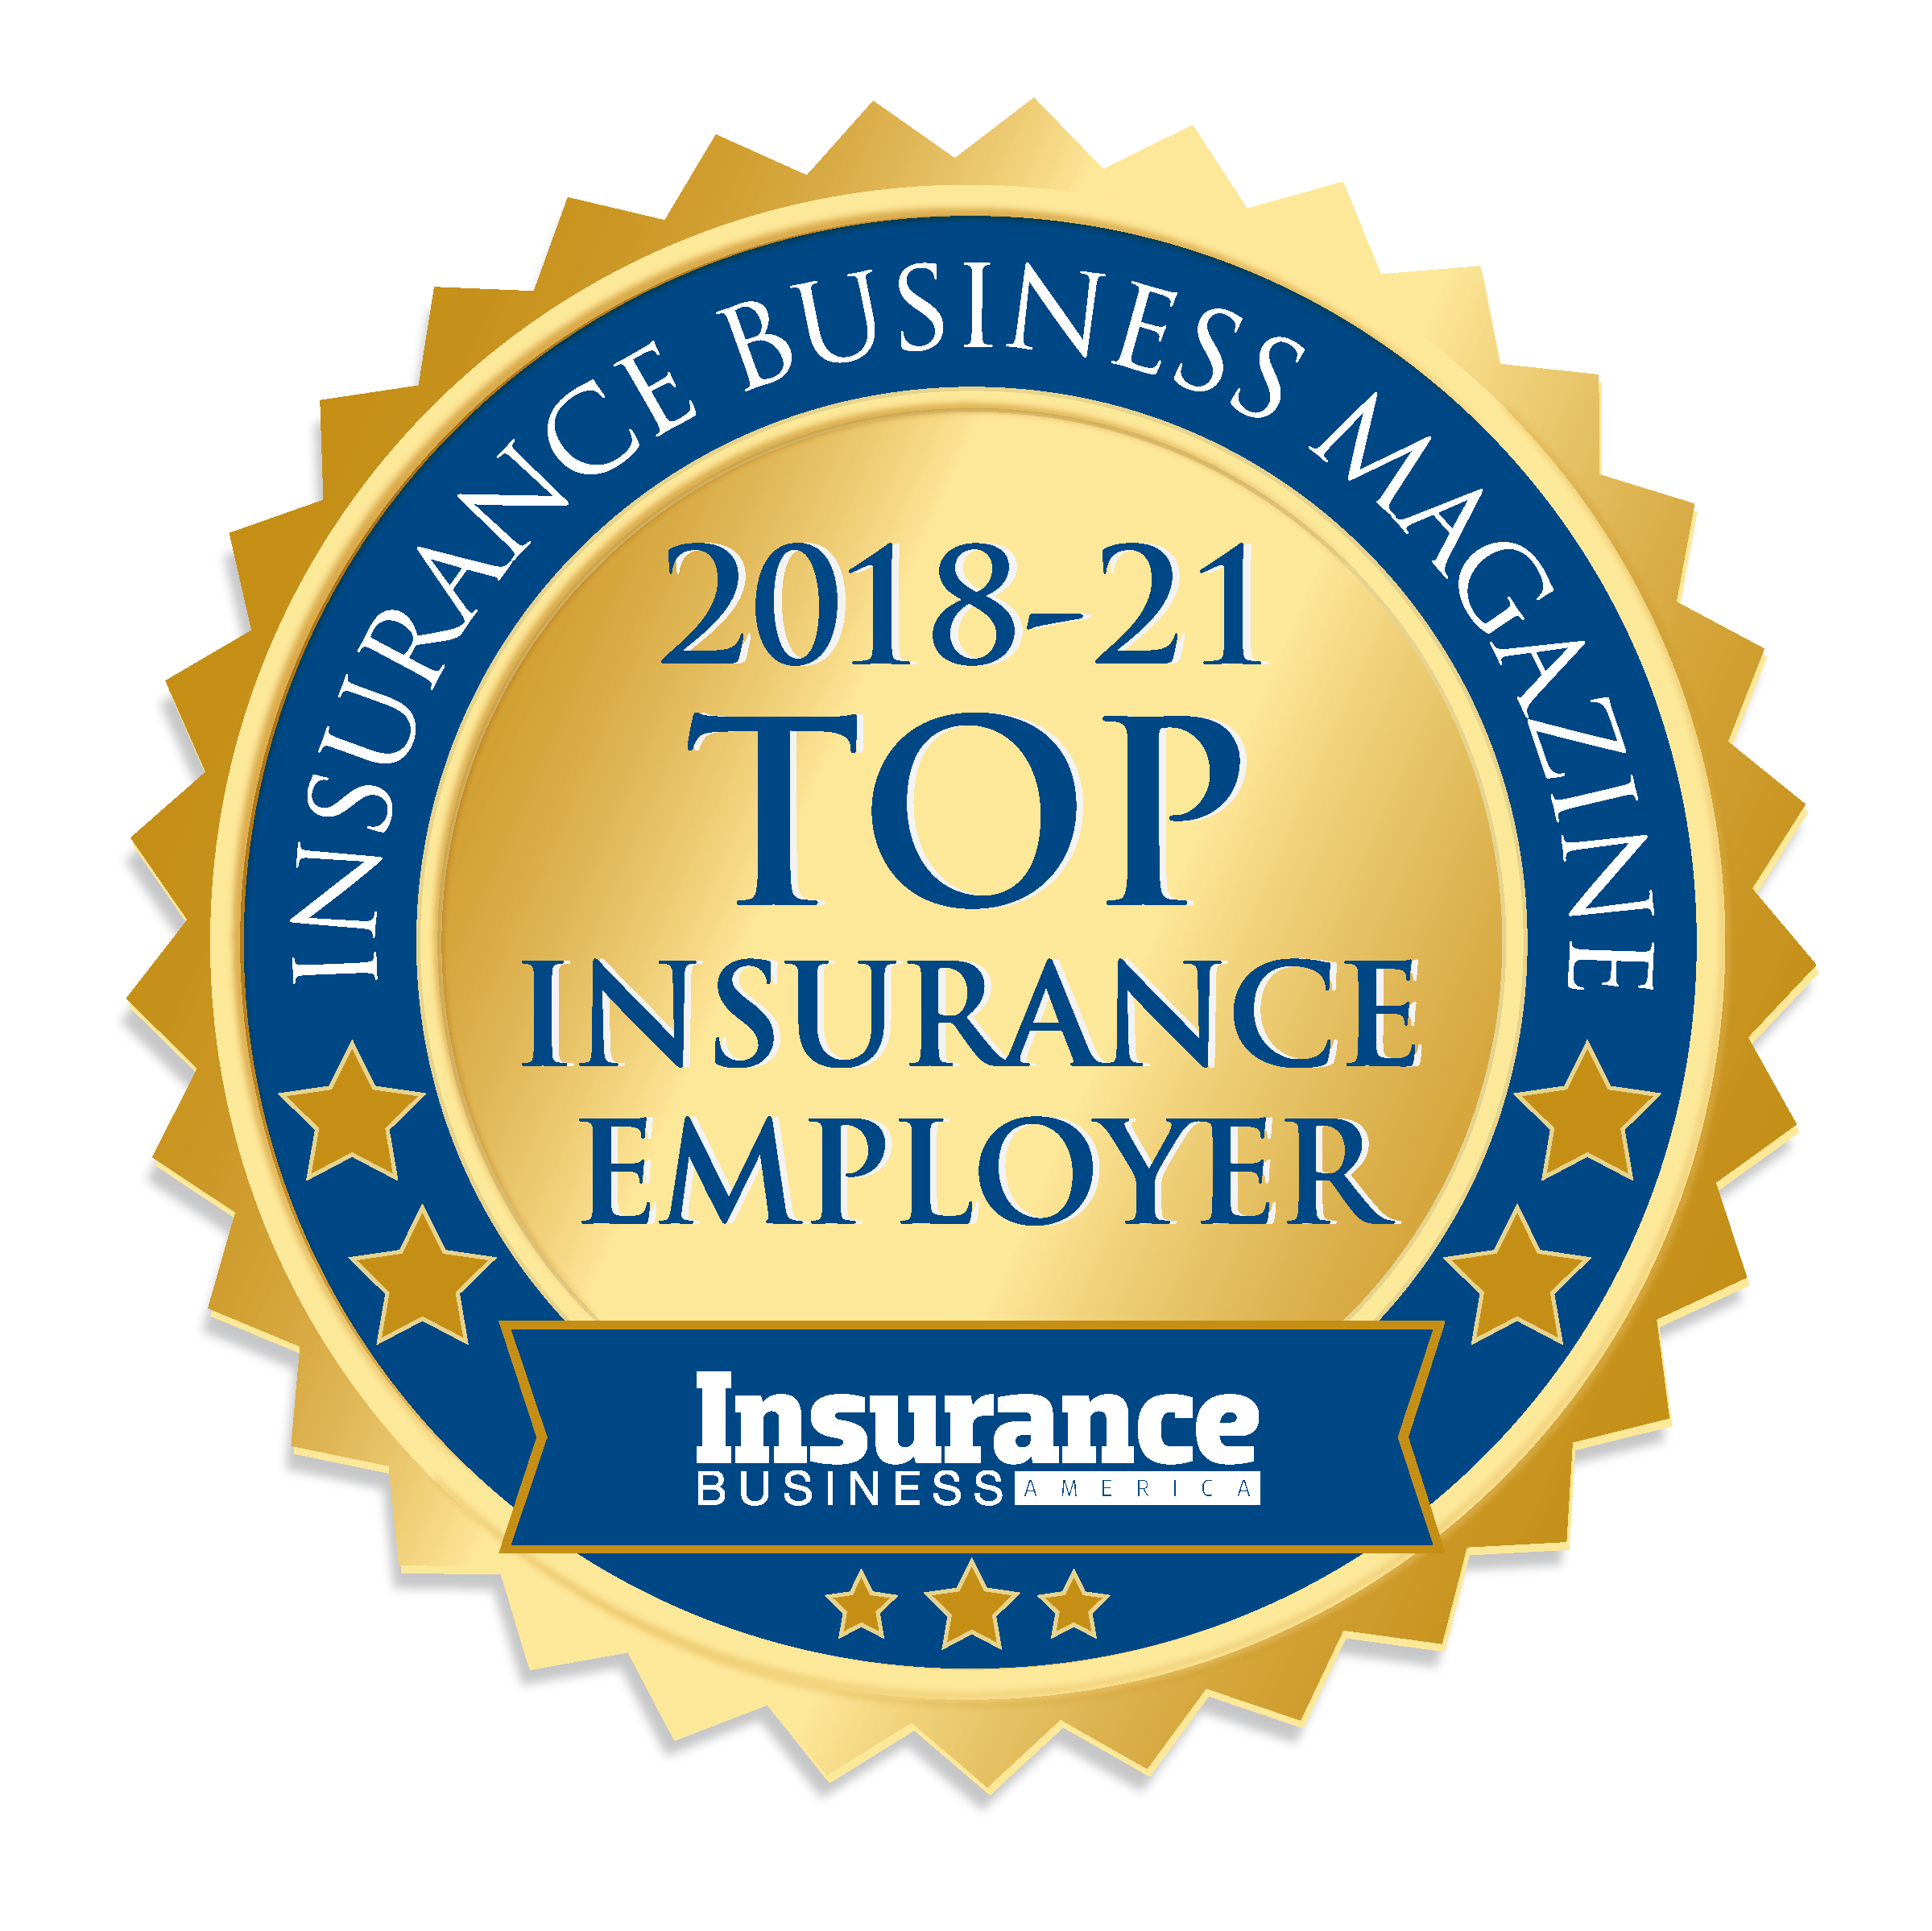 USI Insurance Services - Insurance Business America Top Insurance Employer Recognition, 2018-2021